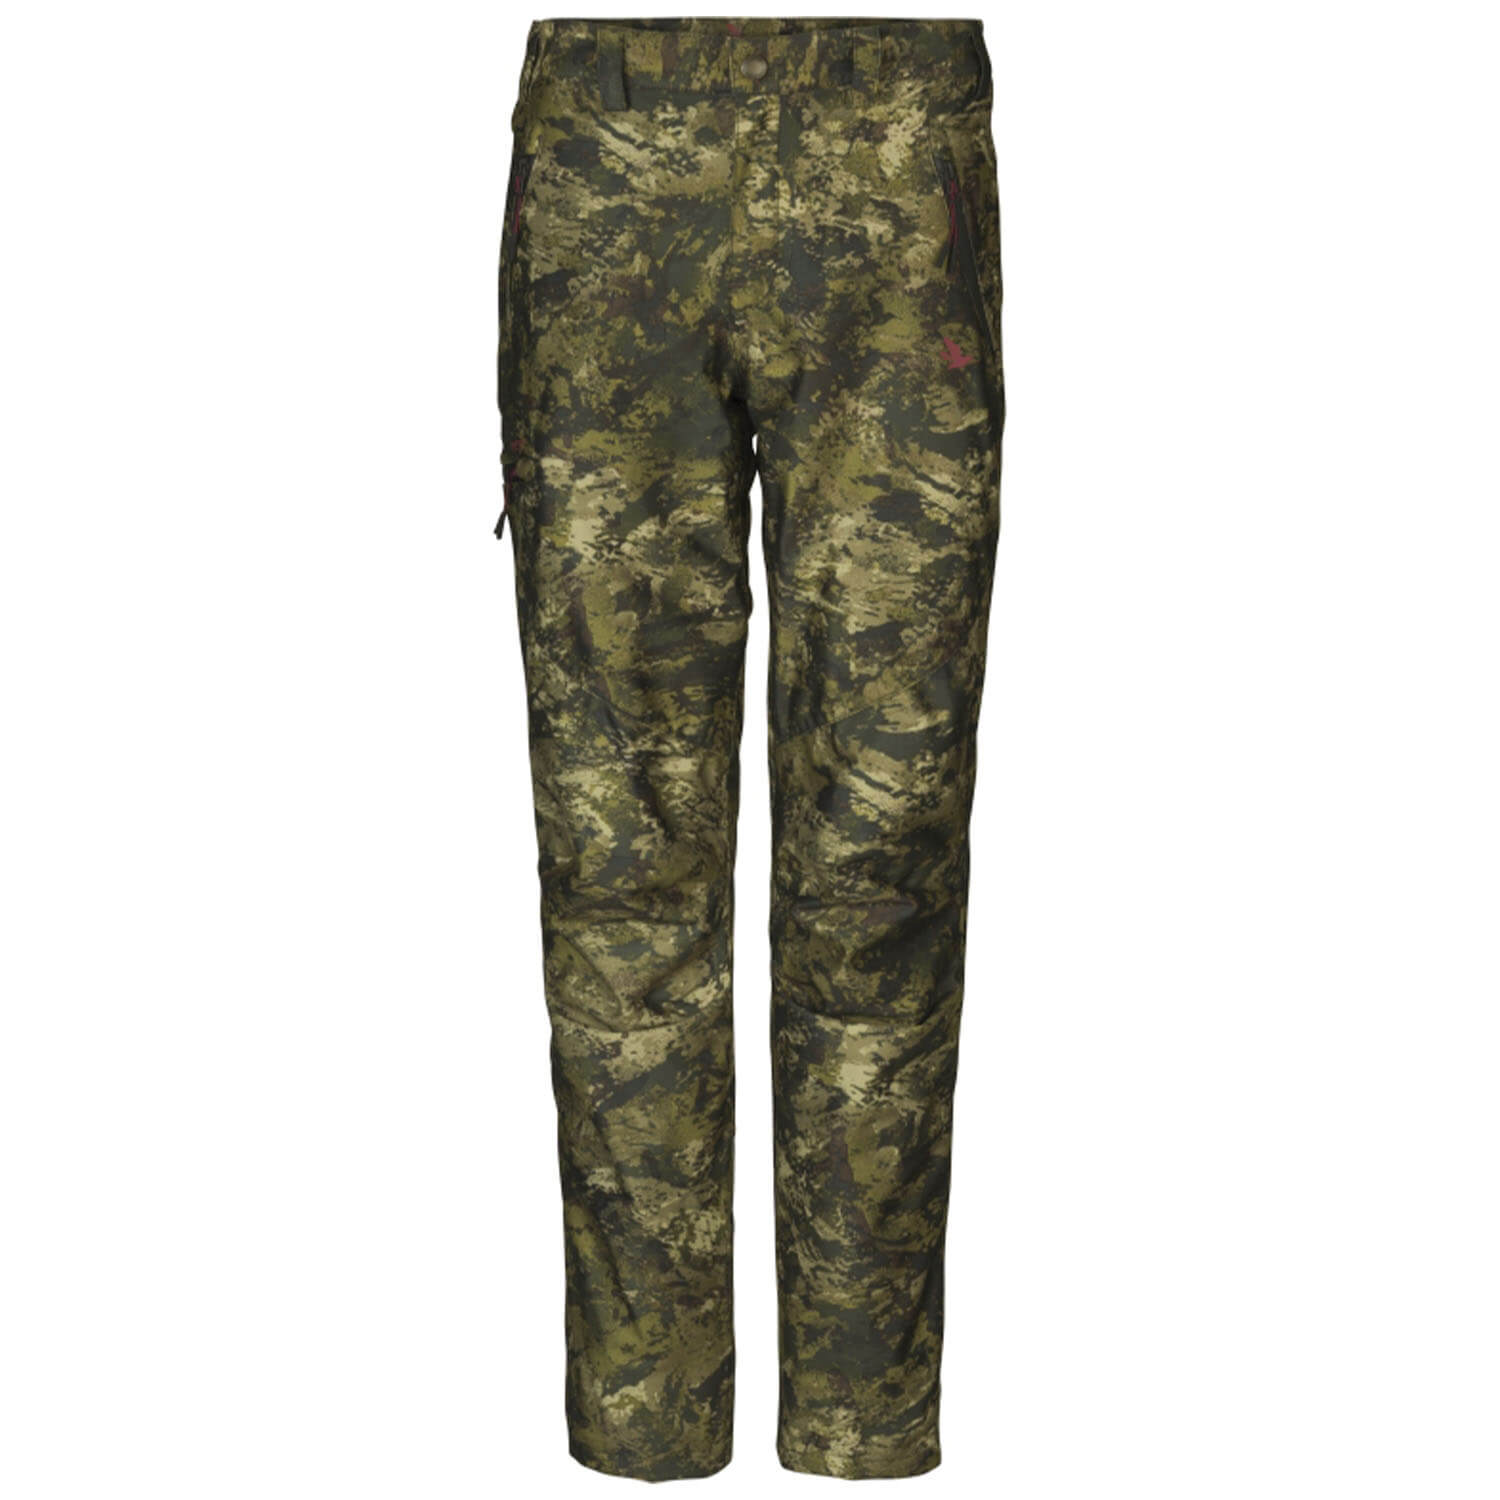 Seeland ladys hunting pants avail (InVis) - Women's Hunting Clothing 